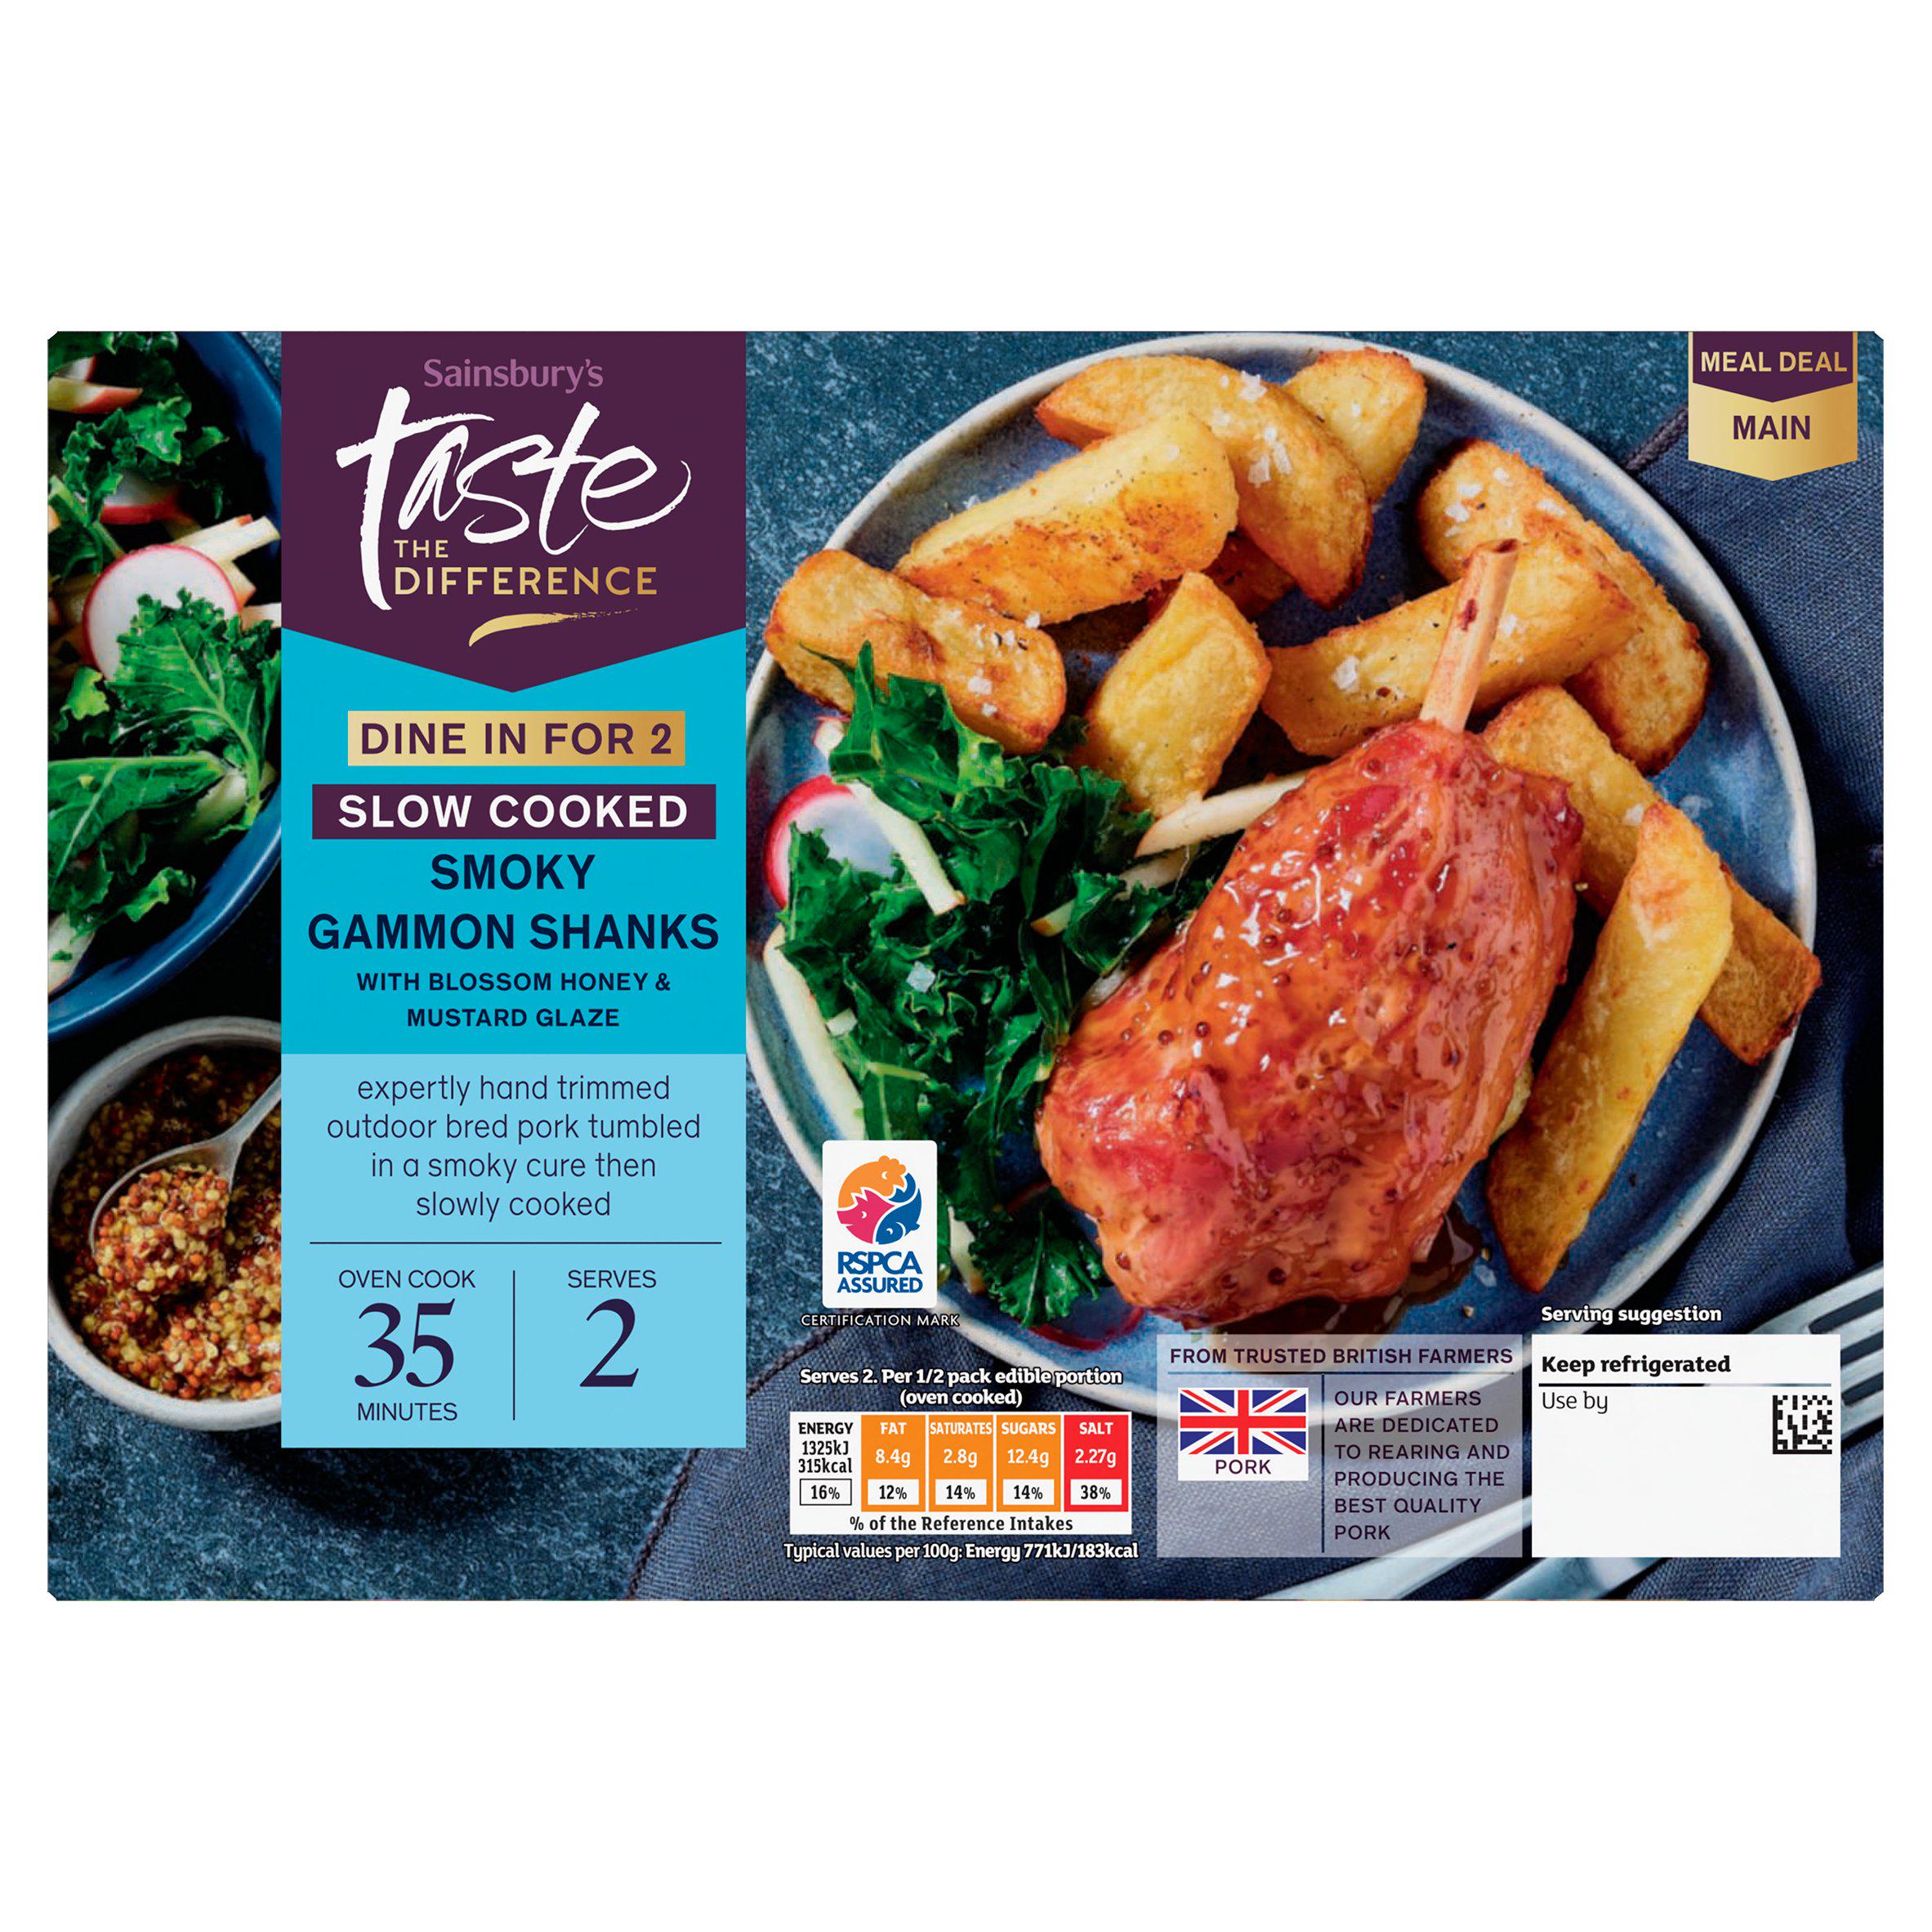 Sainsbury's Slow Cooked Smoky Gammon Shanks, Taste the Difference 515g